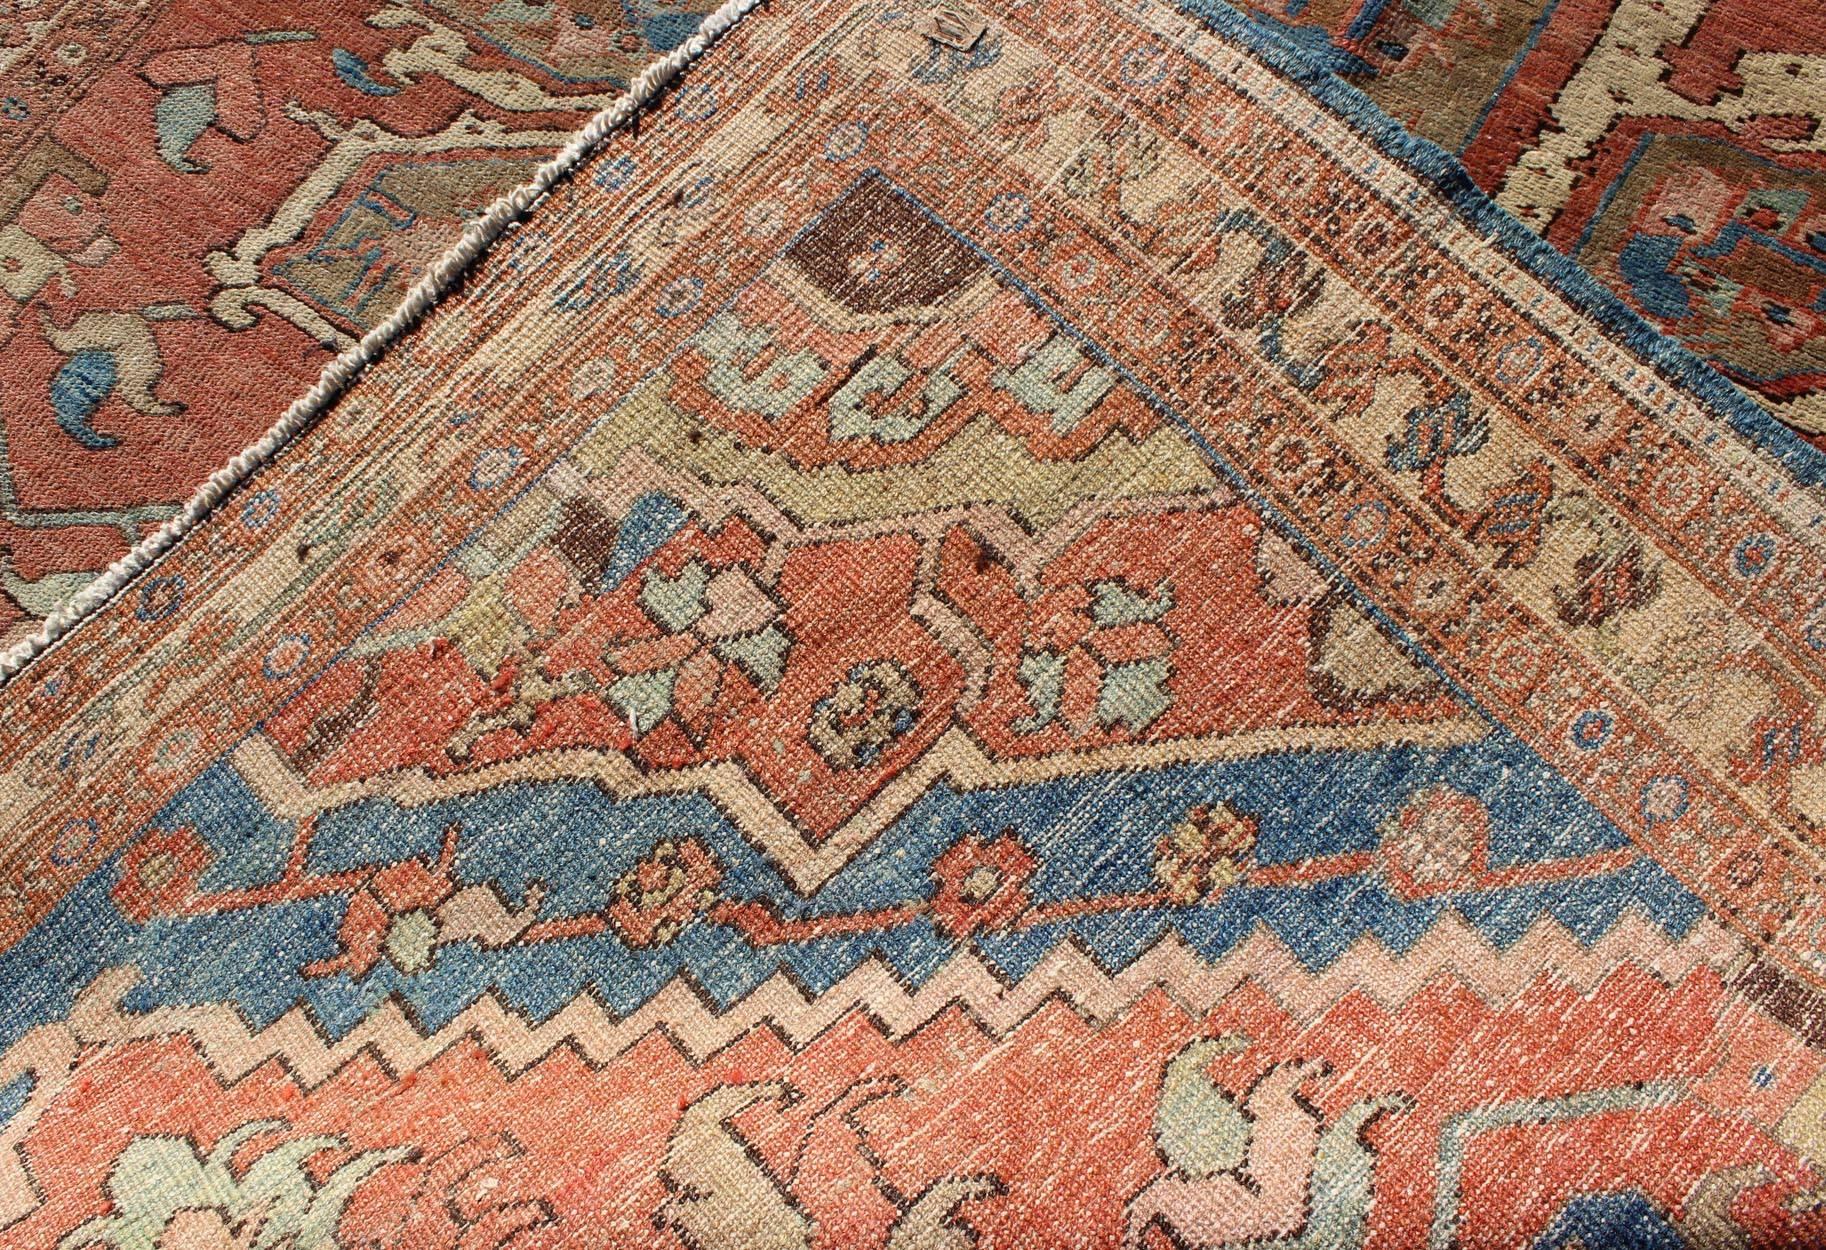 Antique Persian Small Serapi Carpet in Salmon, Light Blue and Ivory 1